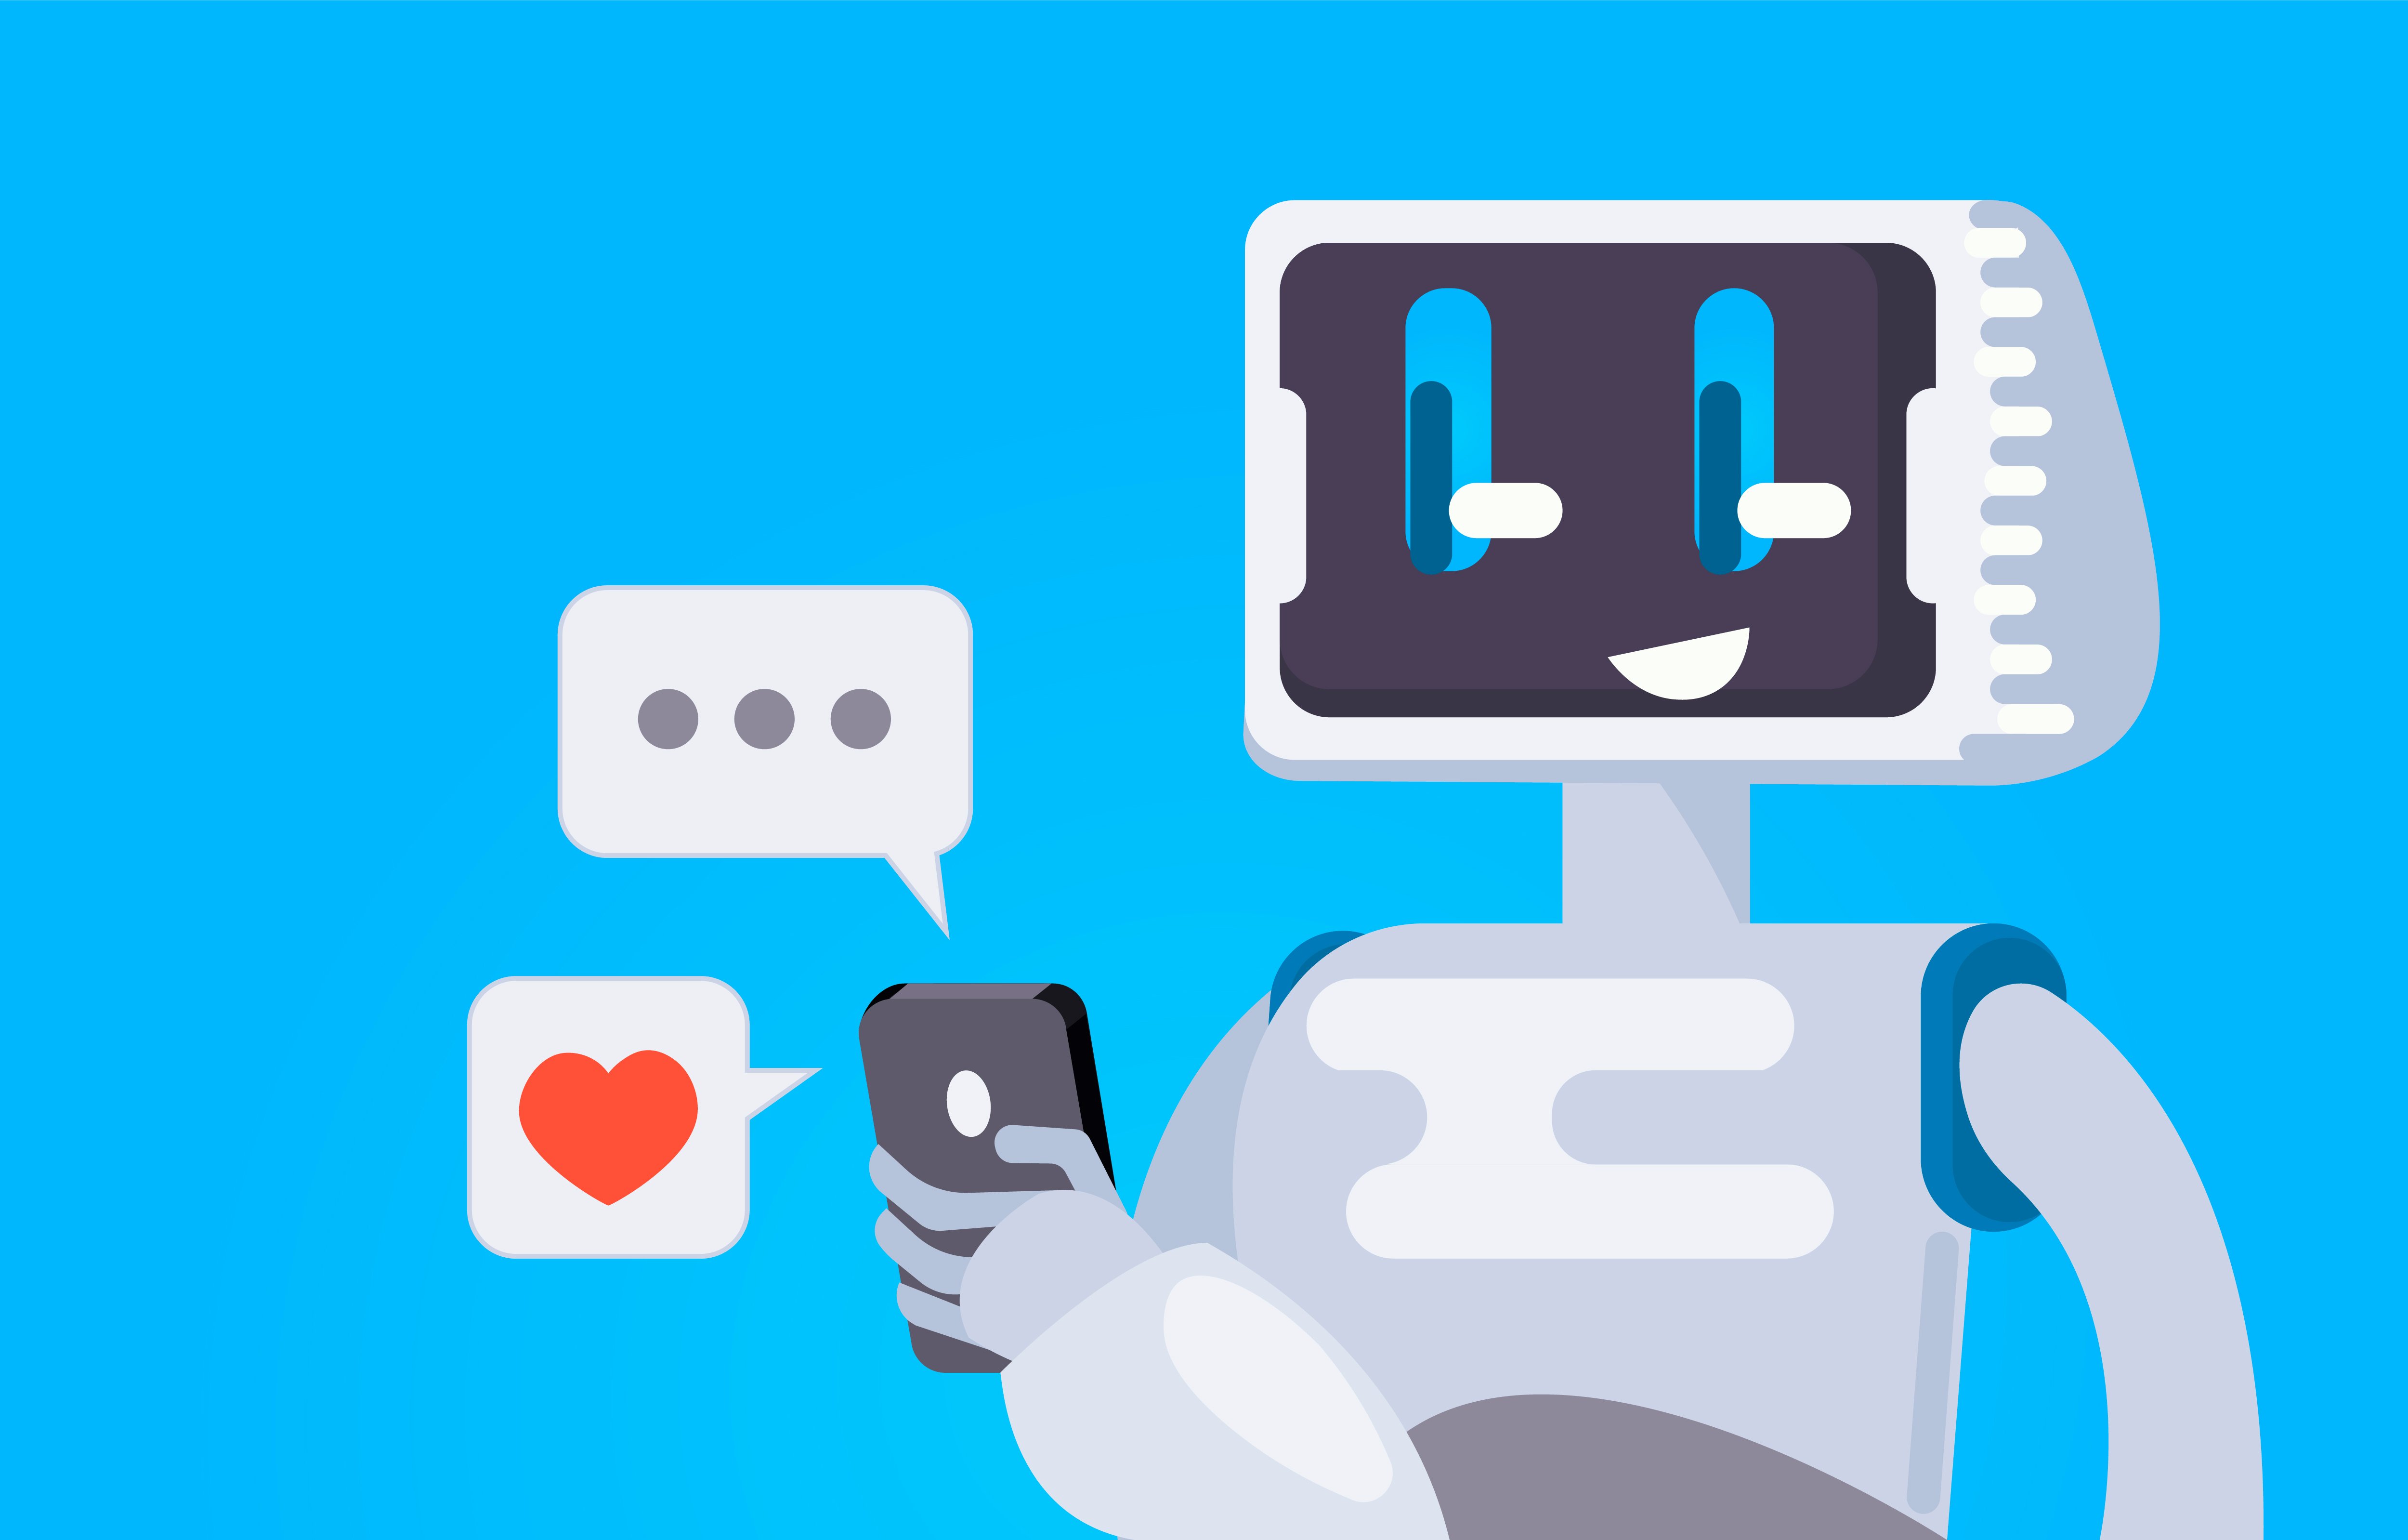 Chat Bot Free Wallpaper. The robot holds the phone, responds to messages. Vector flat illustration